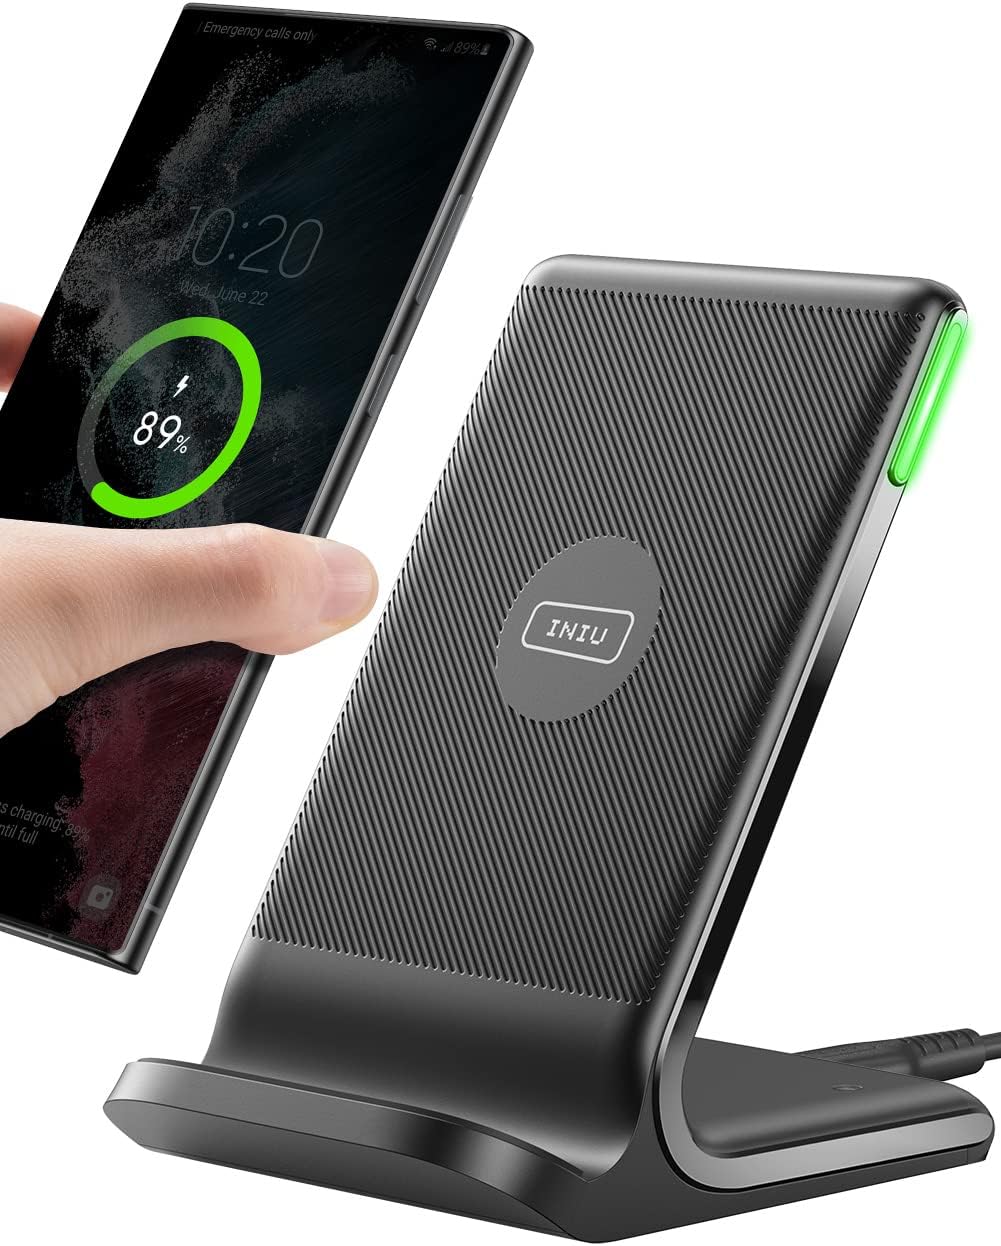 Best Wireless Charger - Top Picks for Fast and Convenient Charging